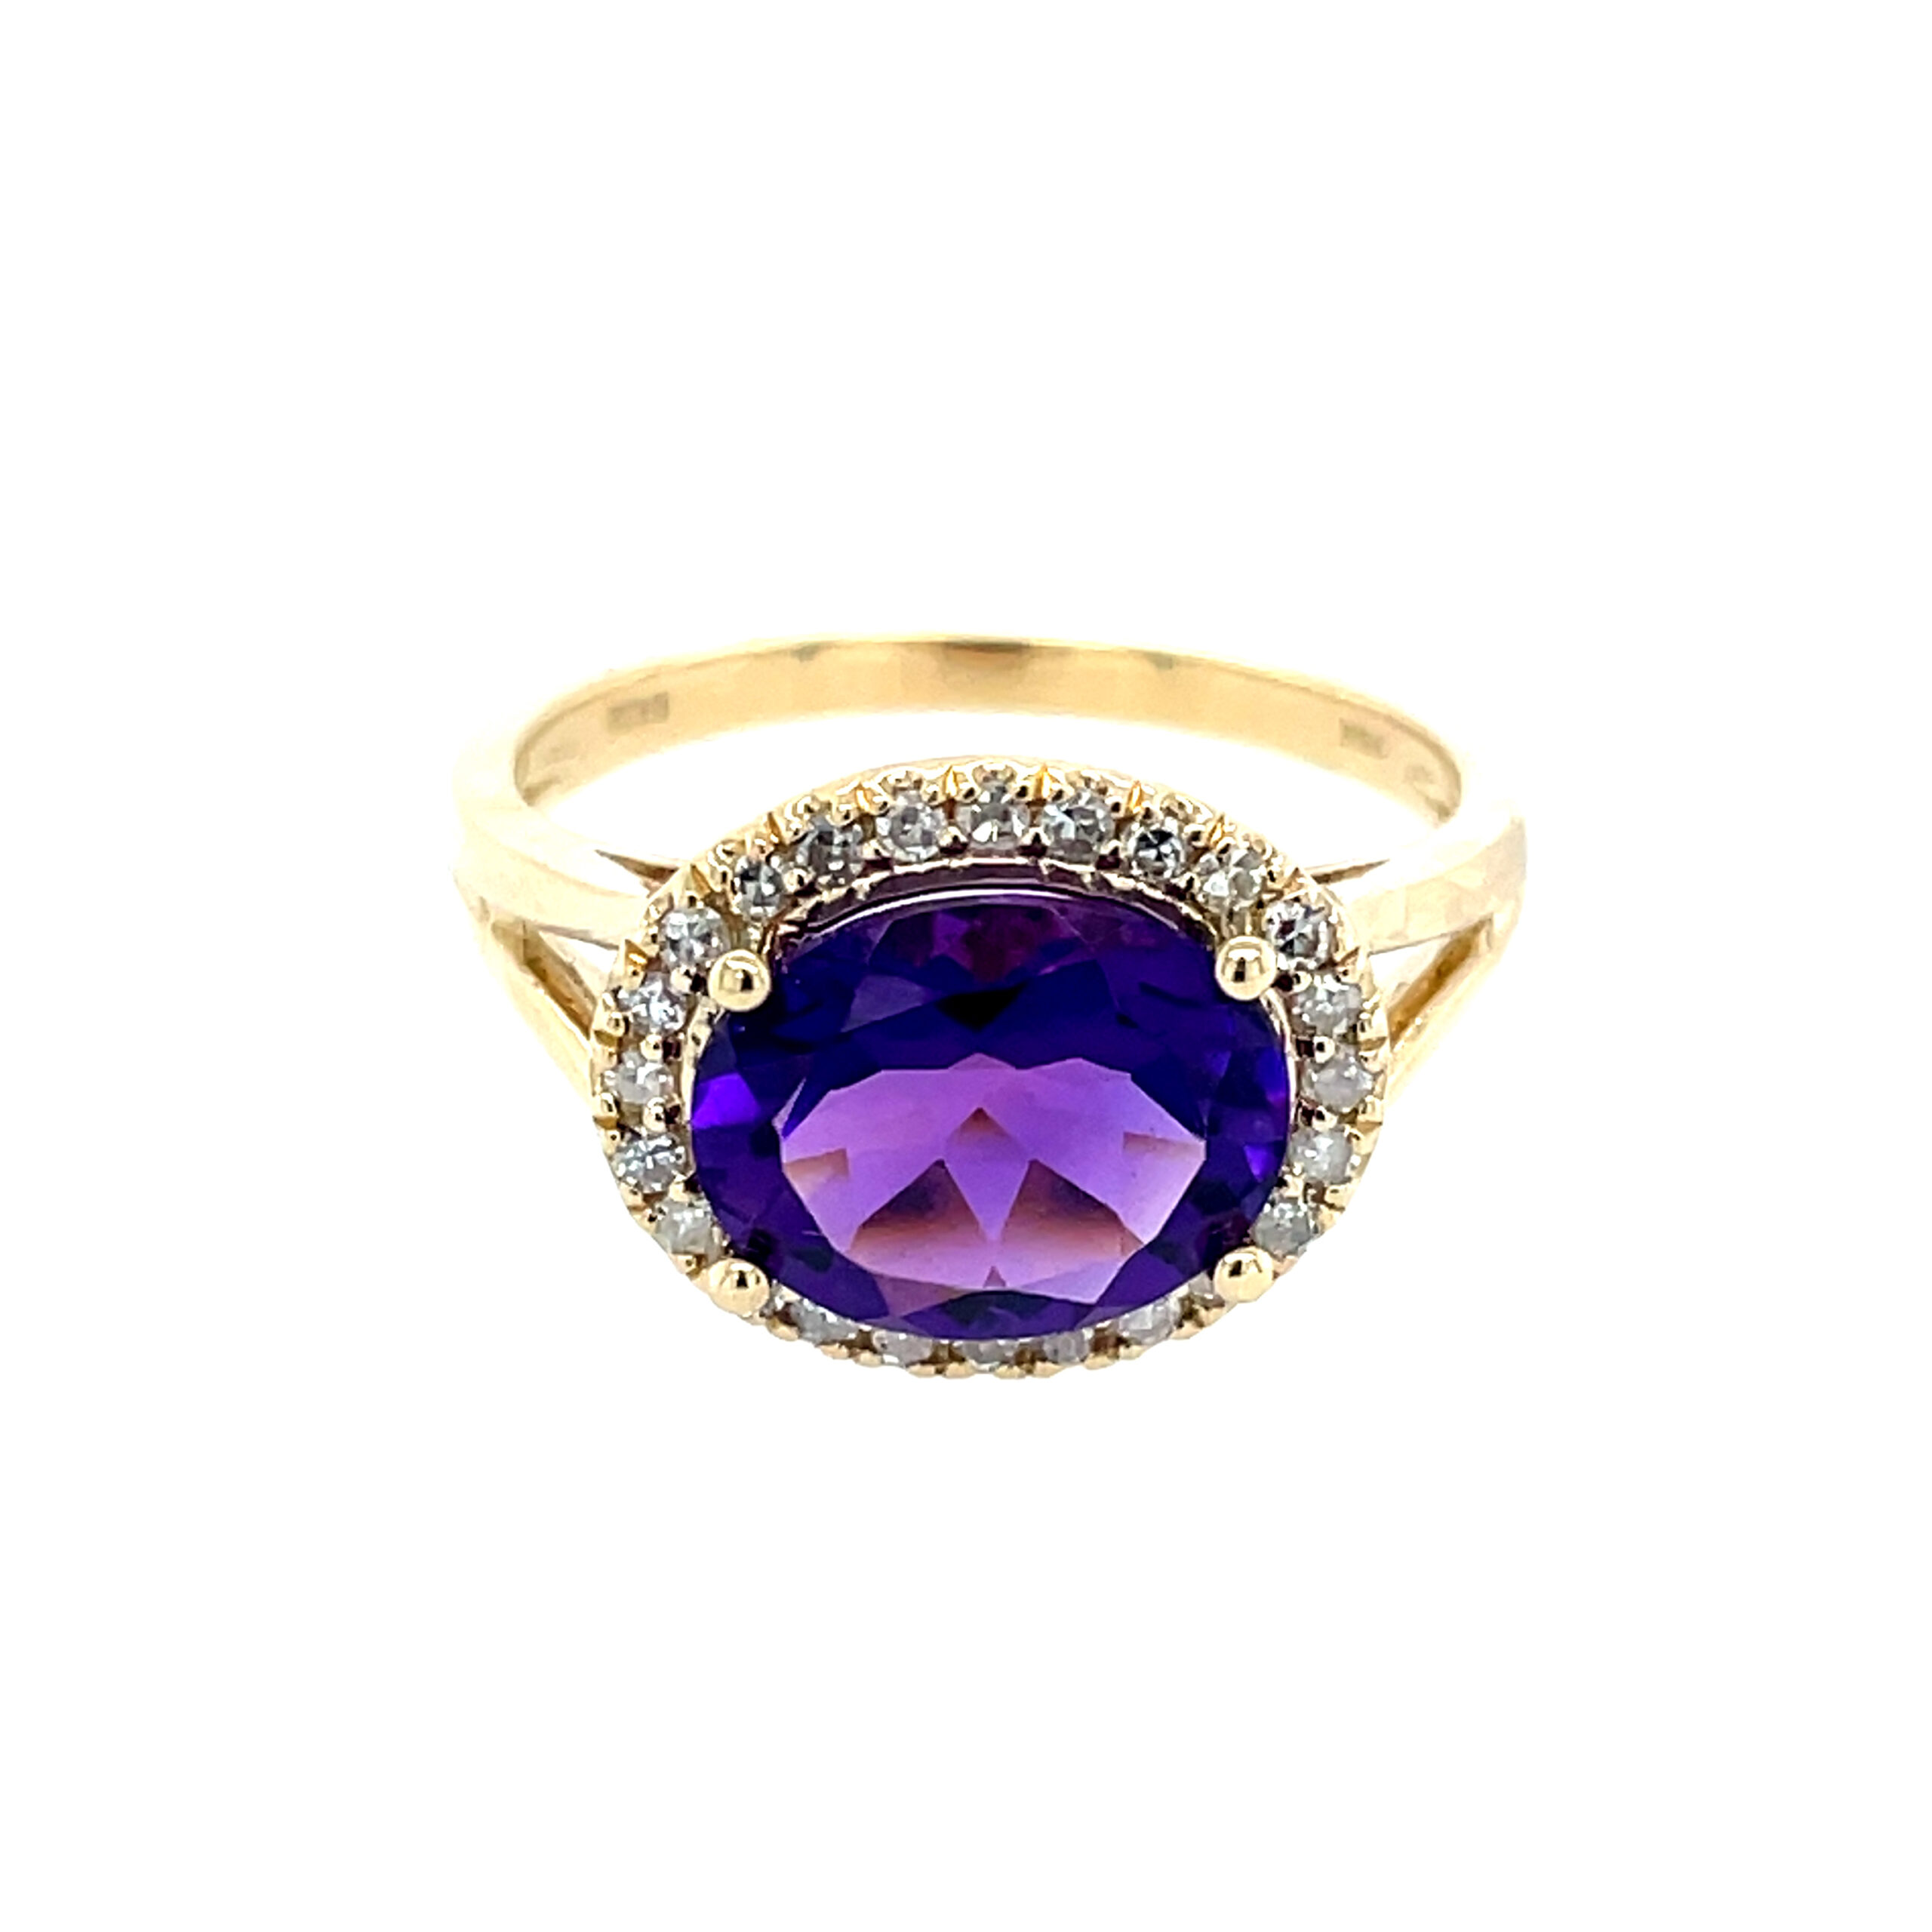 Yellow Gold Amethyst and Diamond Ring